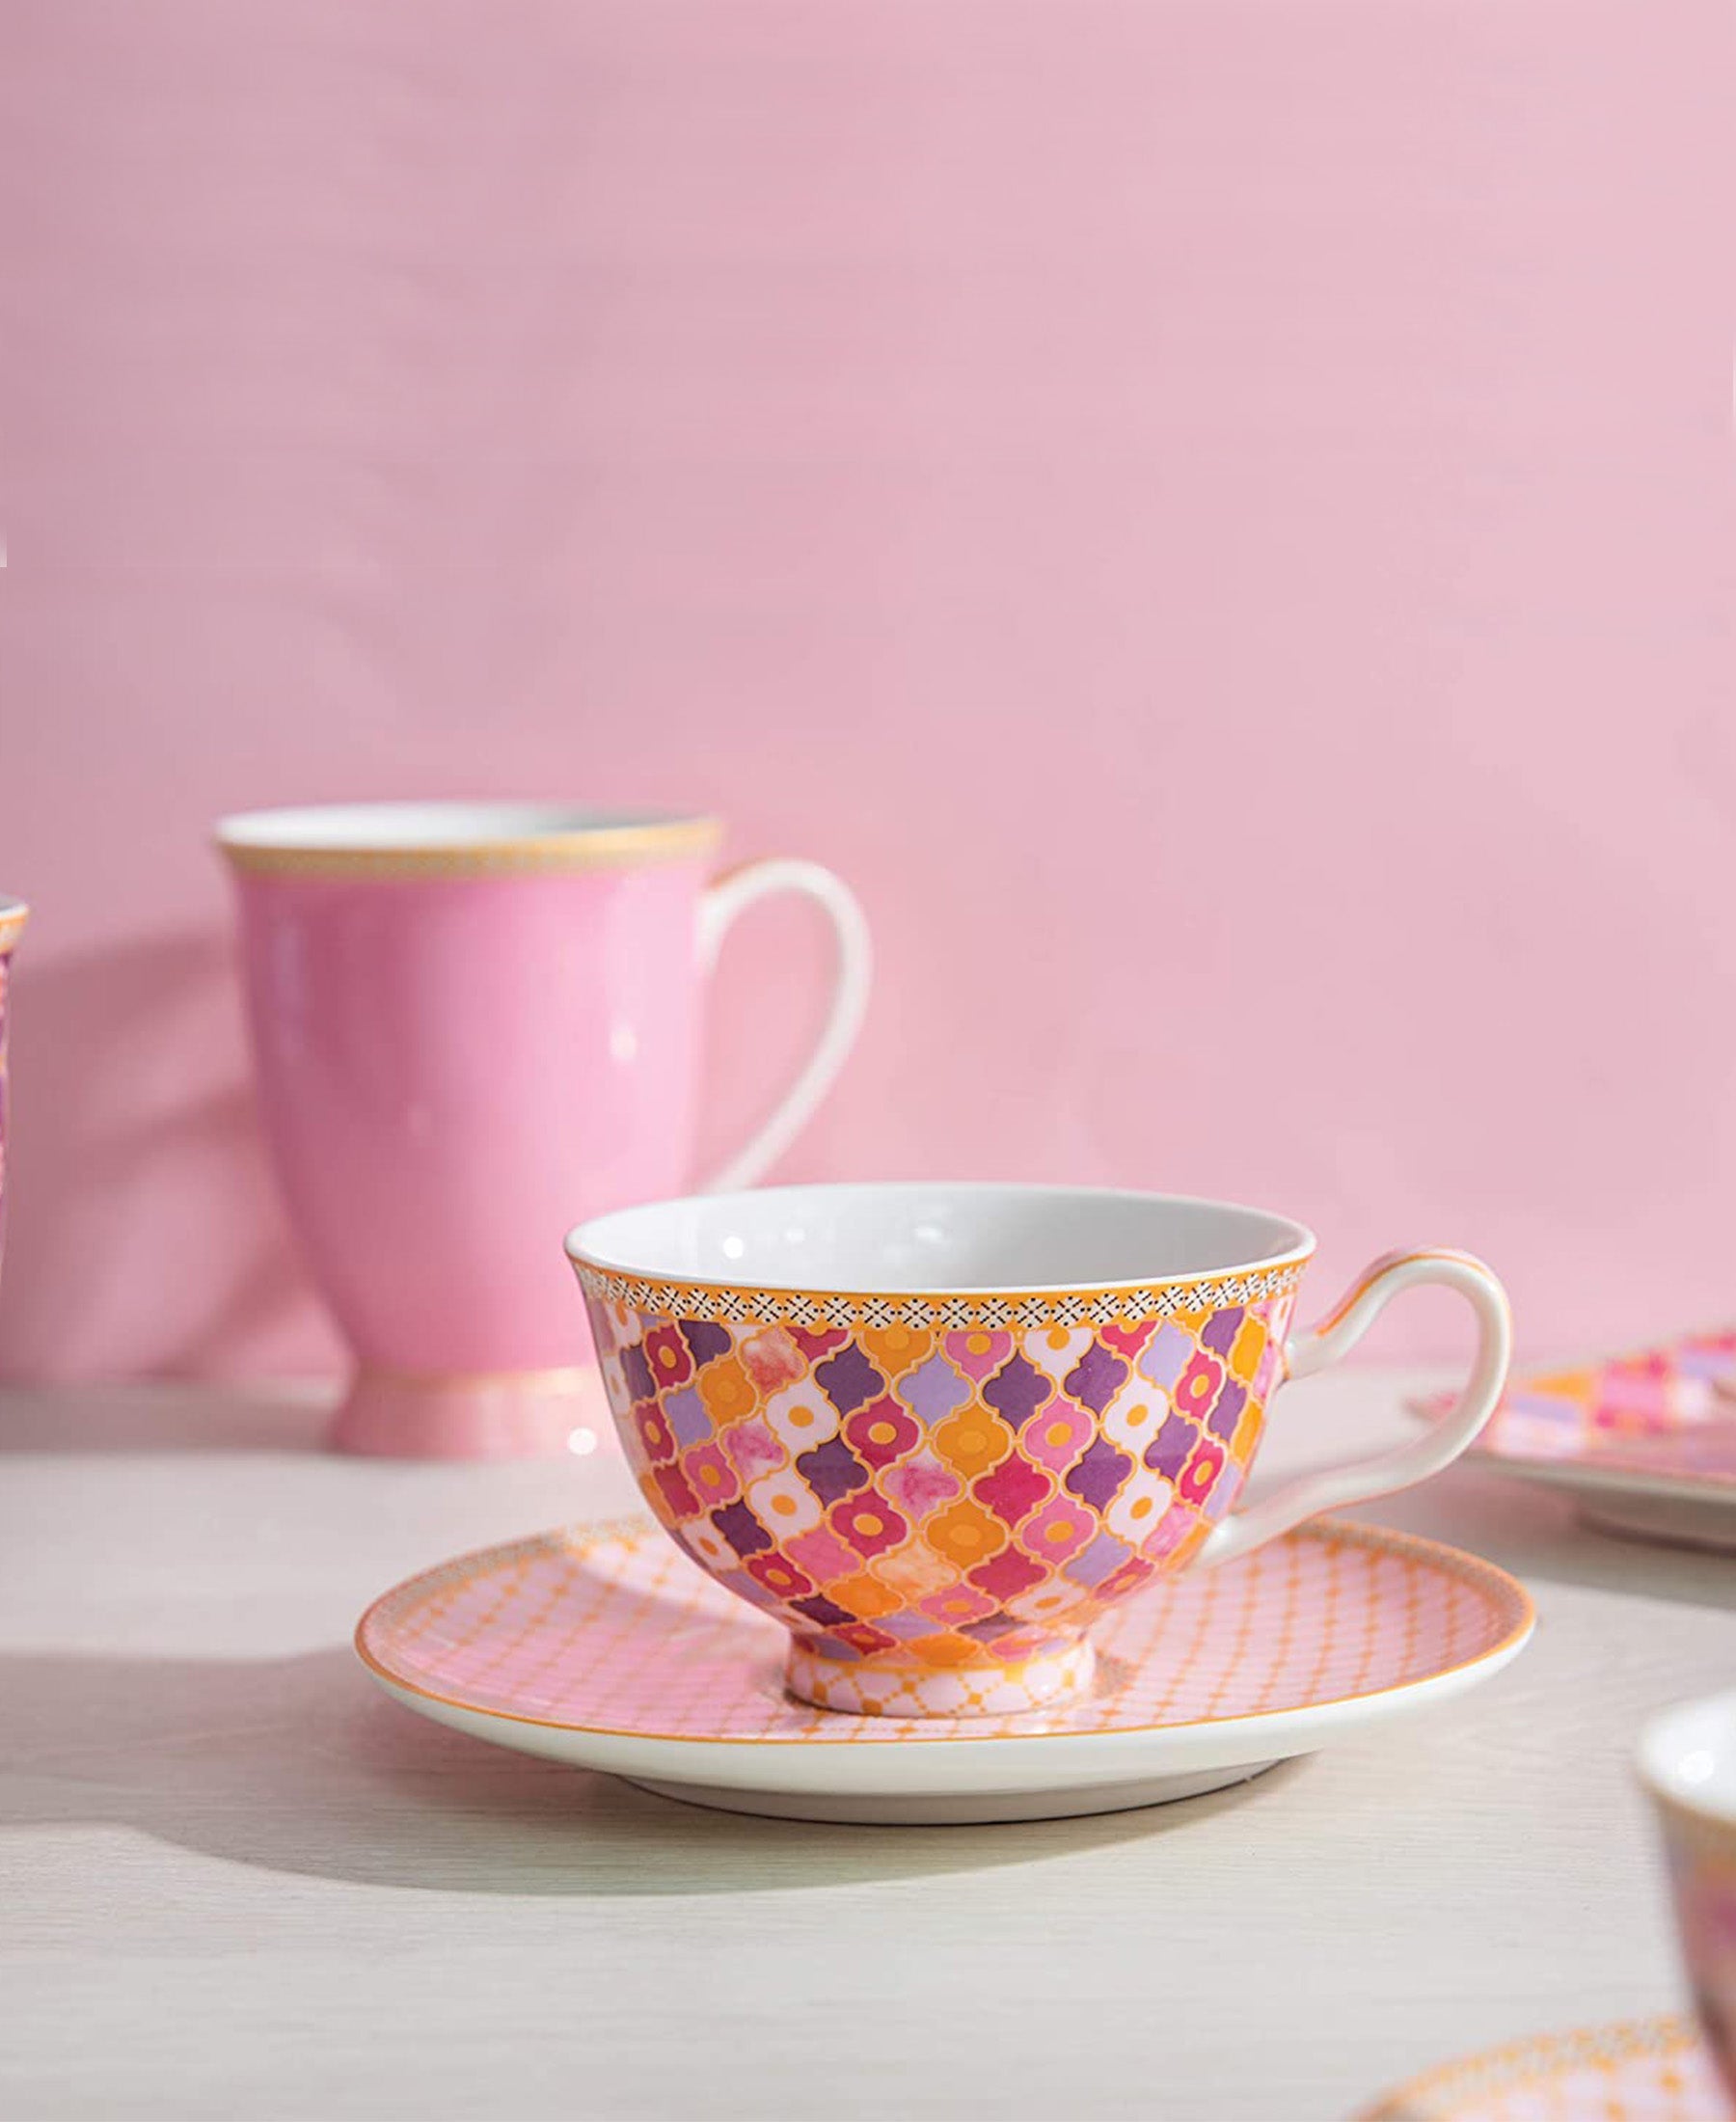 Maxwell & Williams Teas & C's Kasbah Mint 200ml Footed Cup & Saucer - Pink